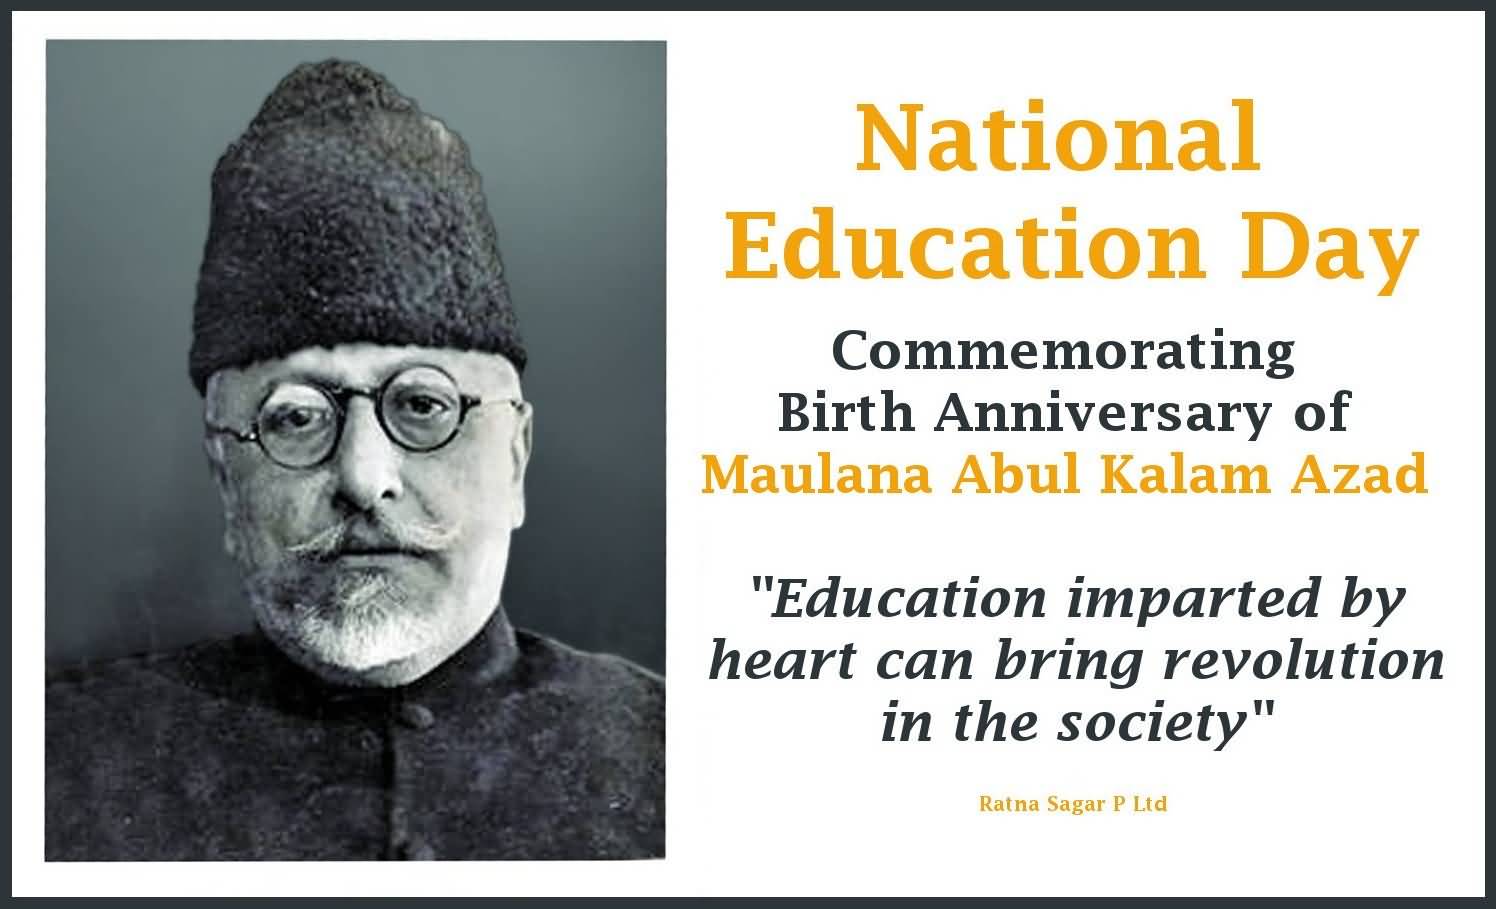 National Education Day Commemorating Birth Anniversary Of Maulana Abul Kalam Azad Educating Imparted By Heart Can Bring Revolution In The Society